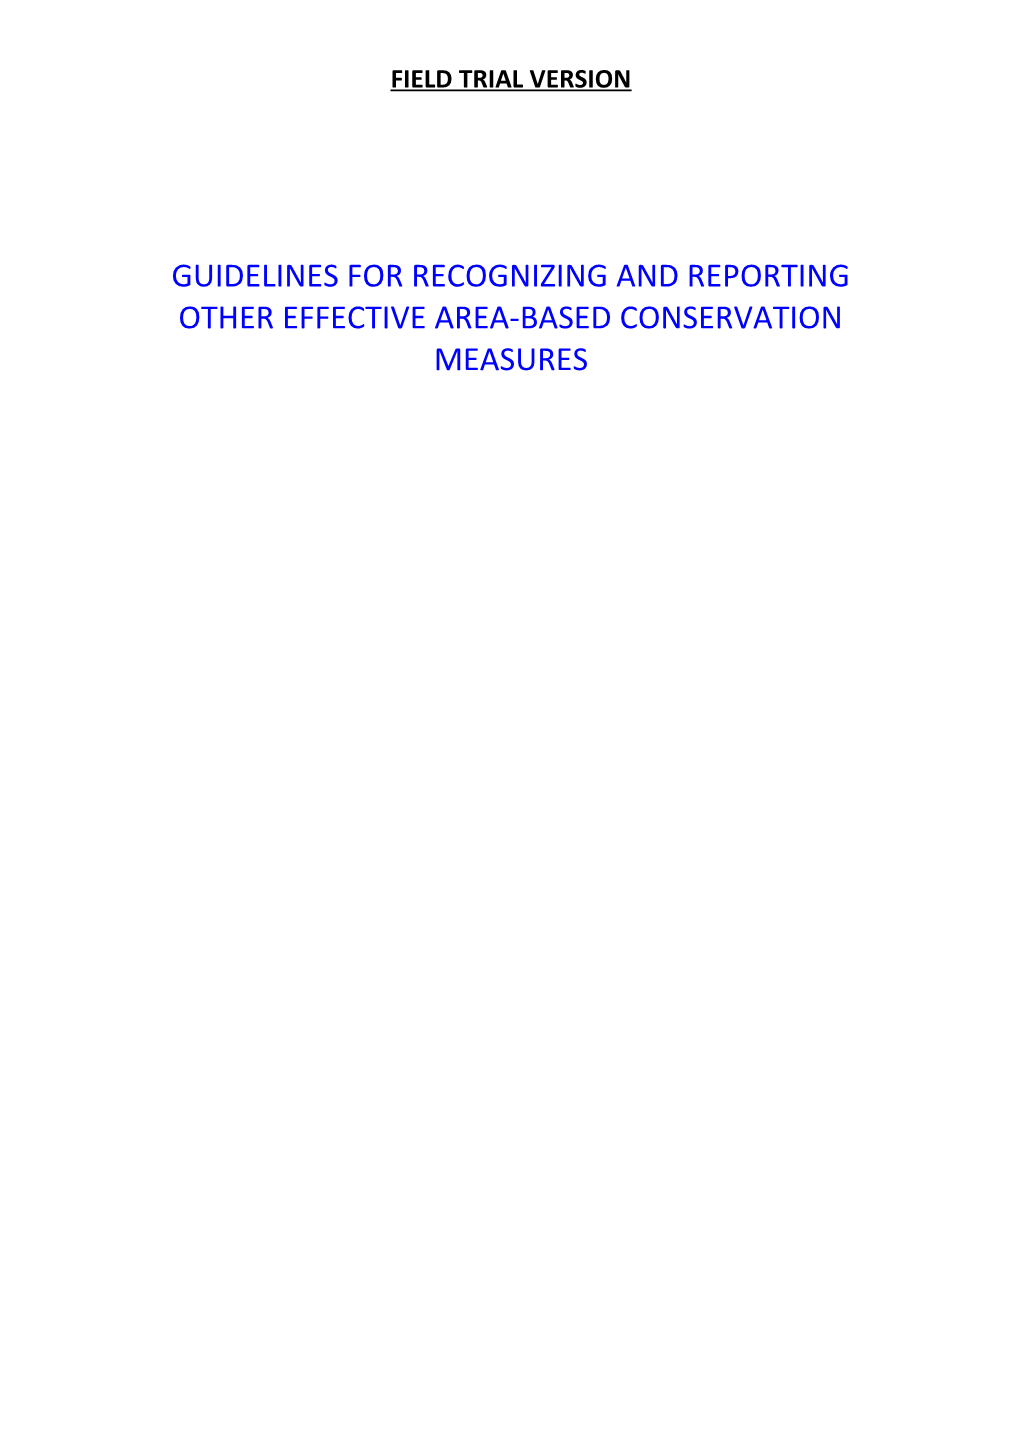 Guidelines for Recognizing and Reporting Other Effective Area-Based Conservation Measures